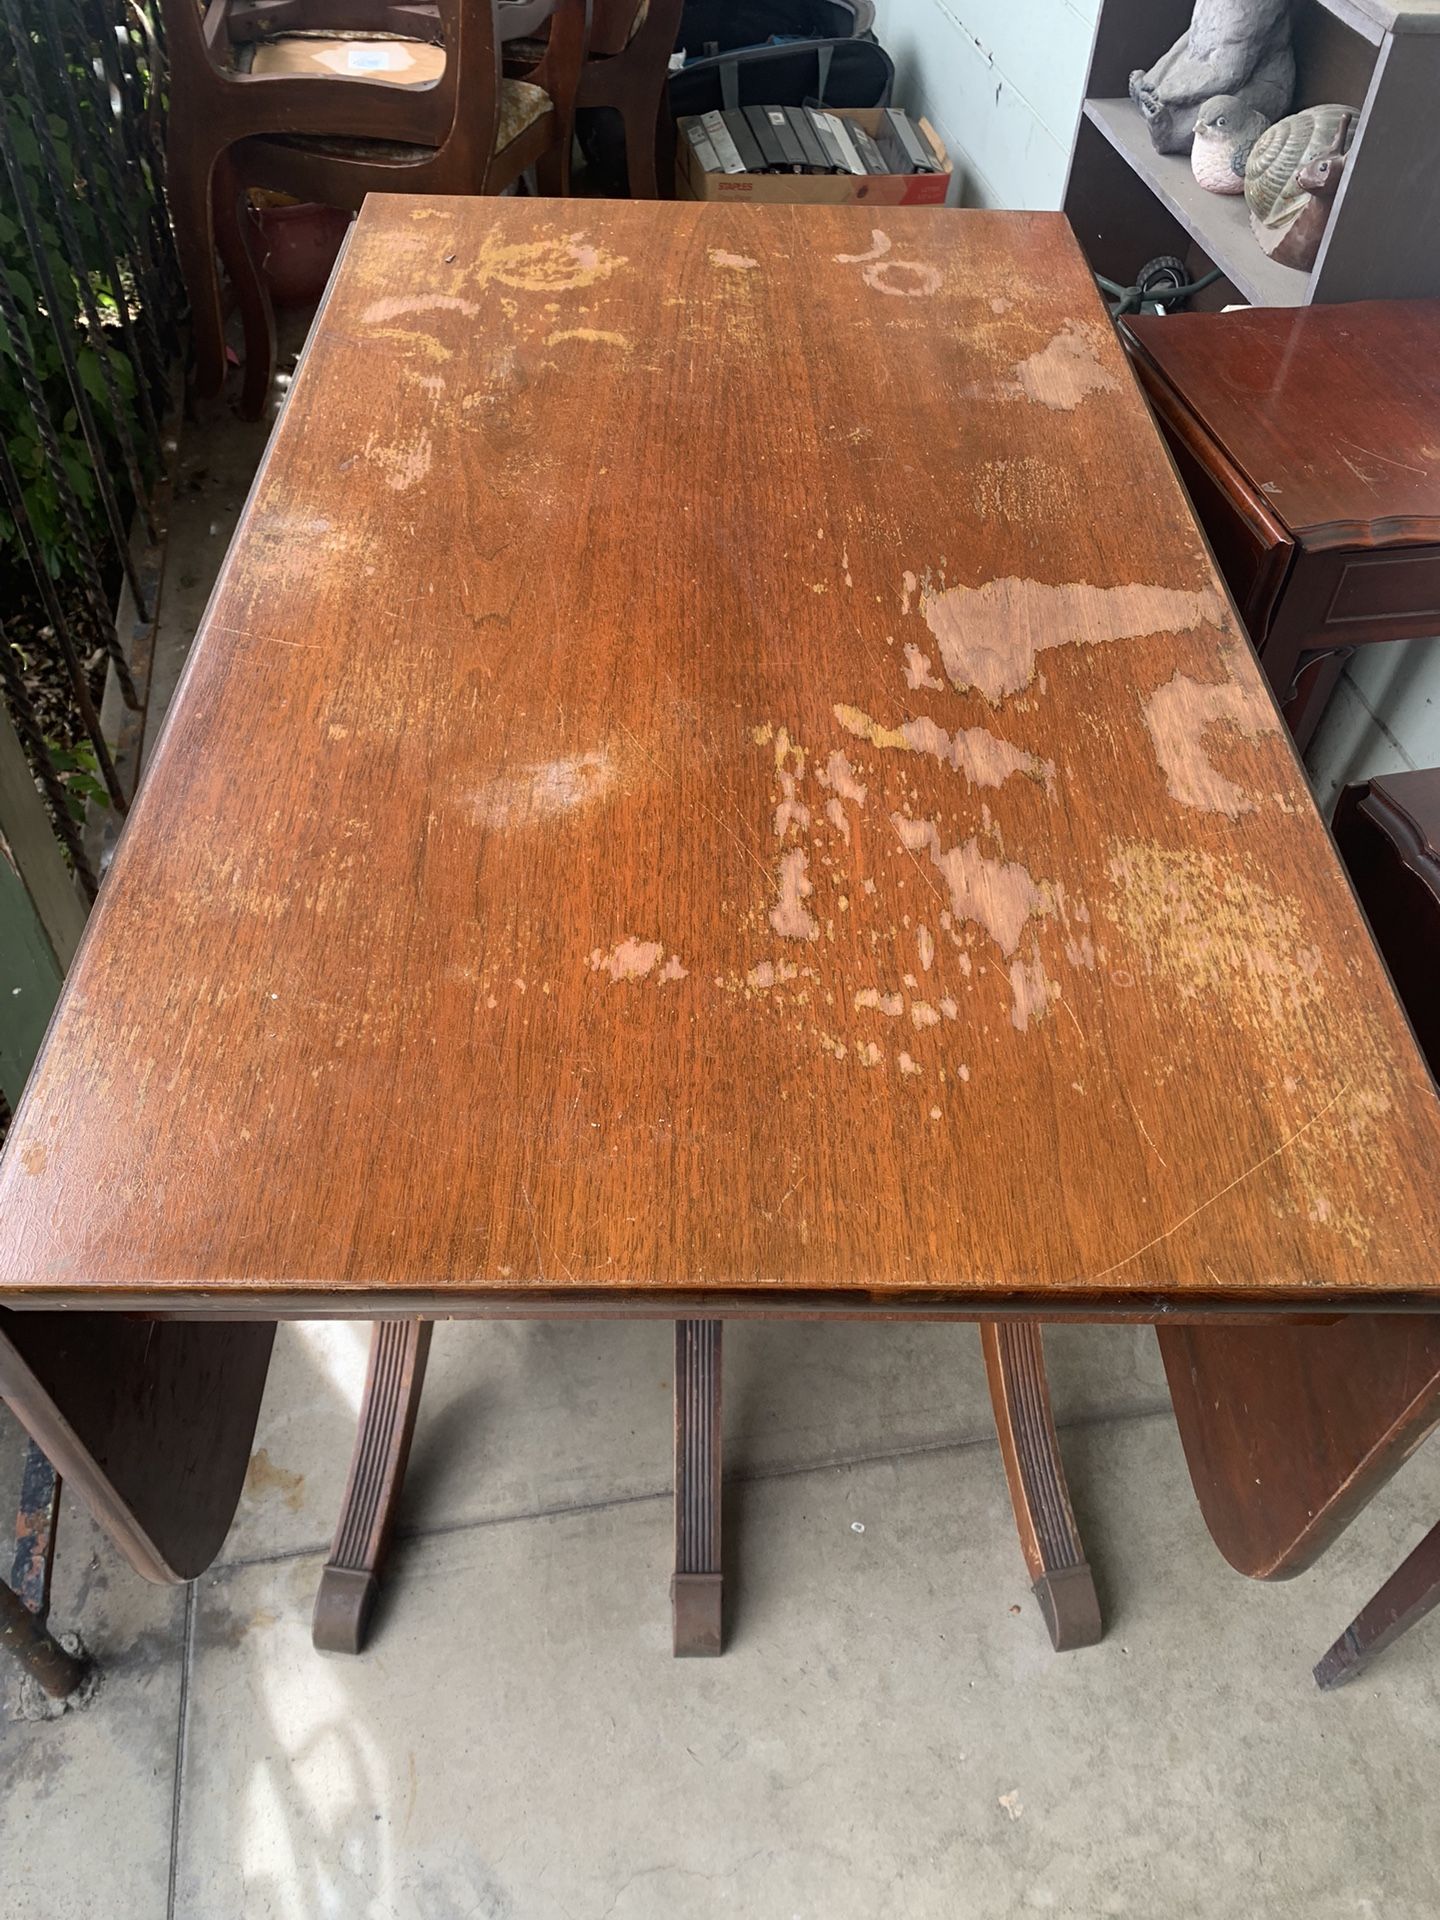 Antique Dining Table And Chairs